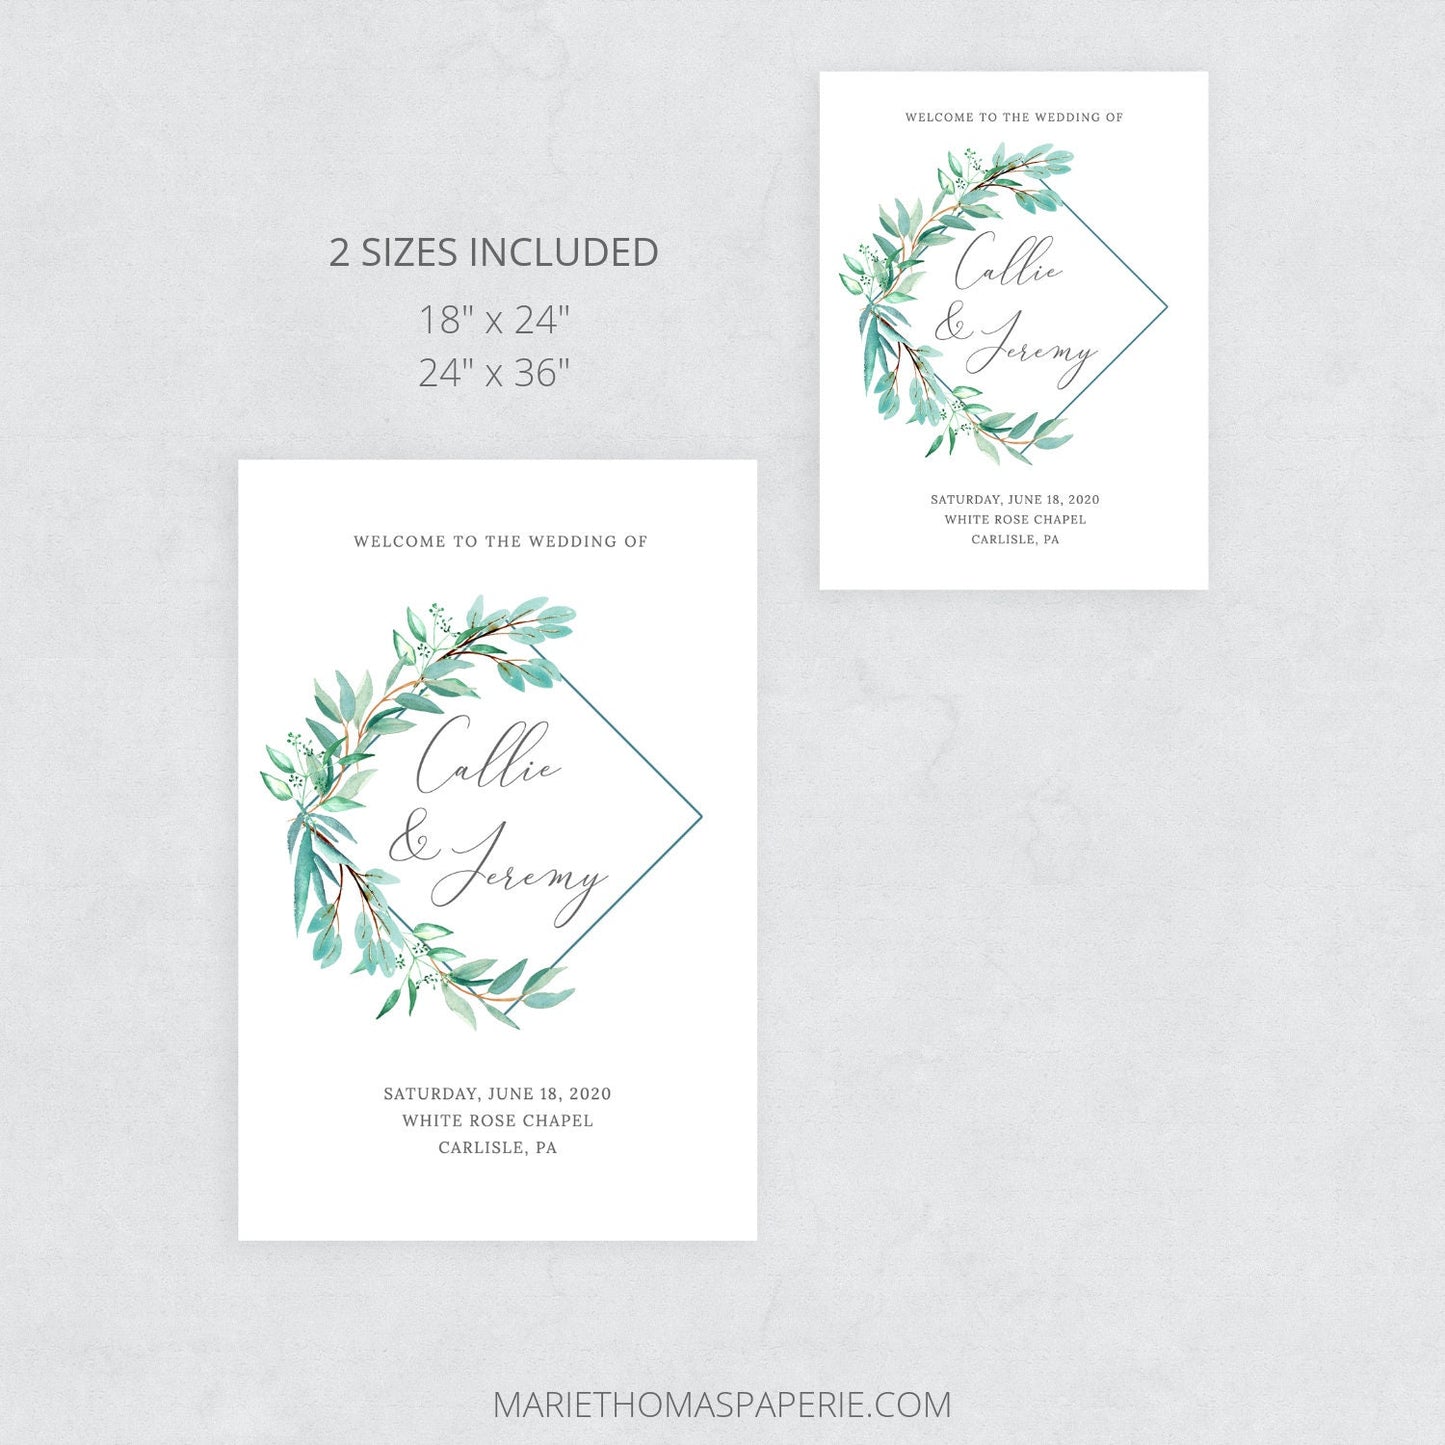 Editable Wreath Wedding Welcome Sign with Greenery Welcome to our Wedding Sign (18x24 24x36) Template